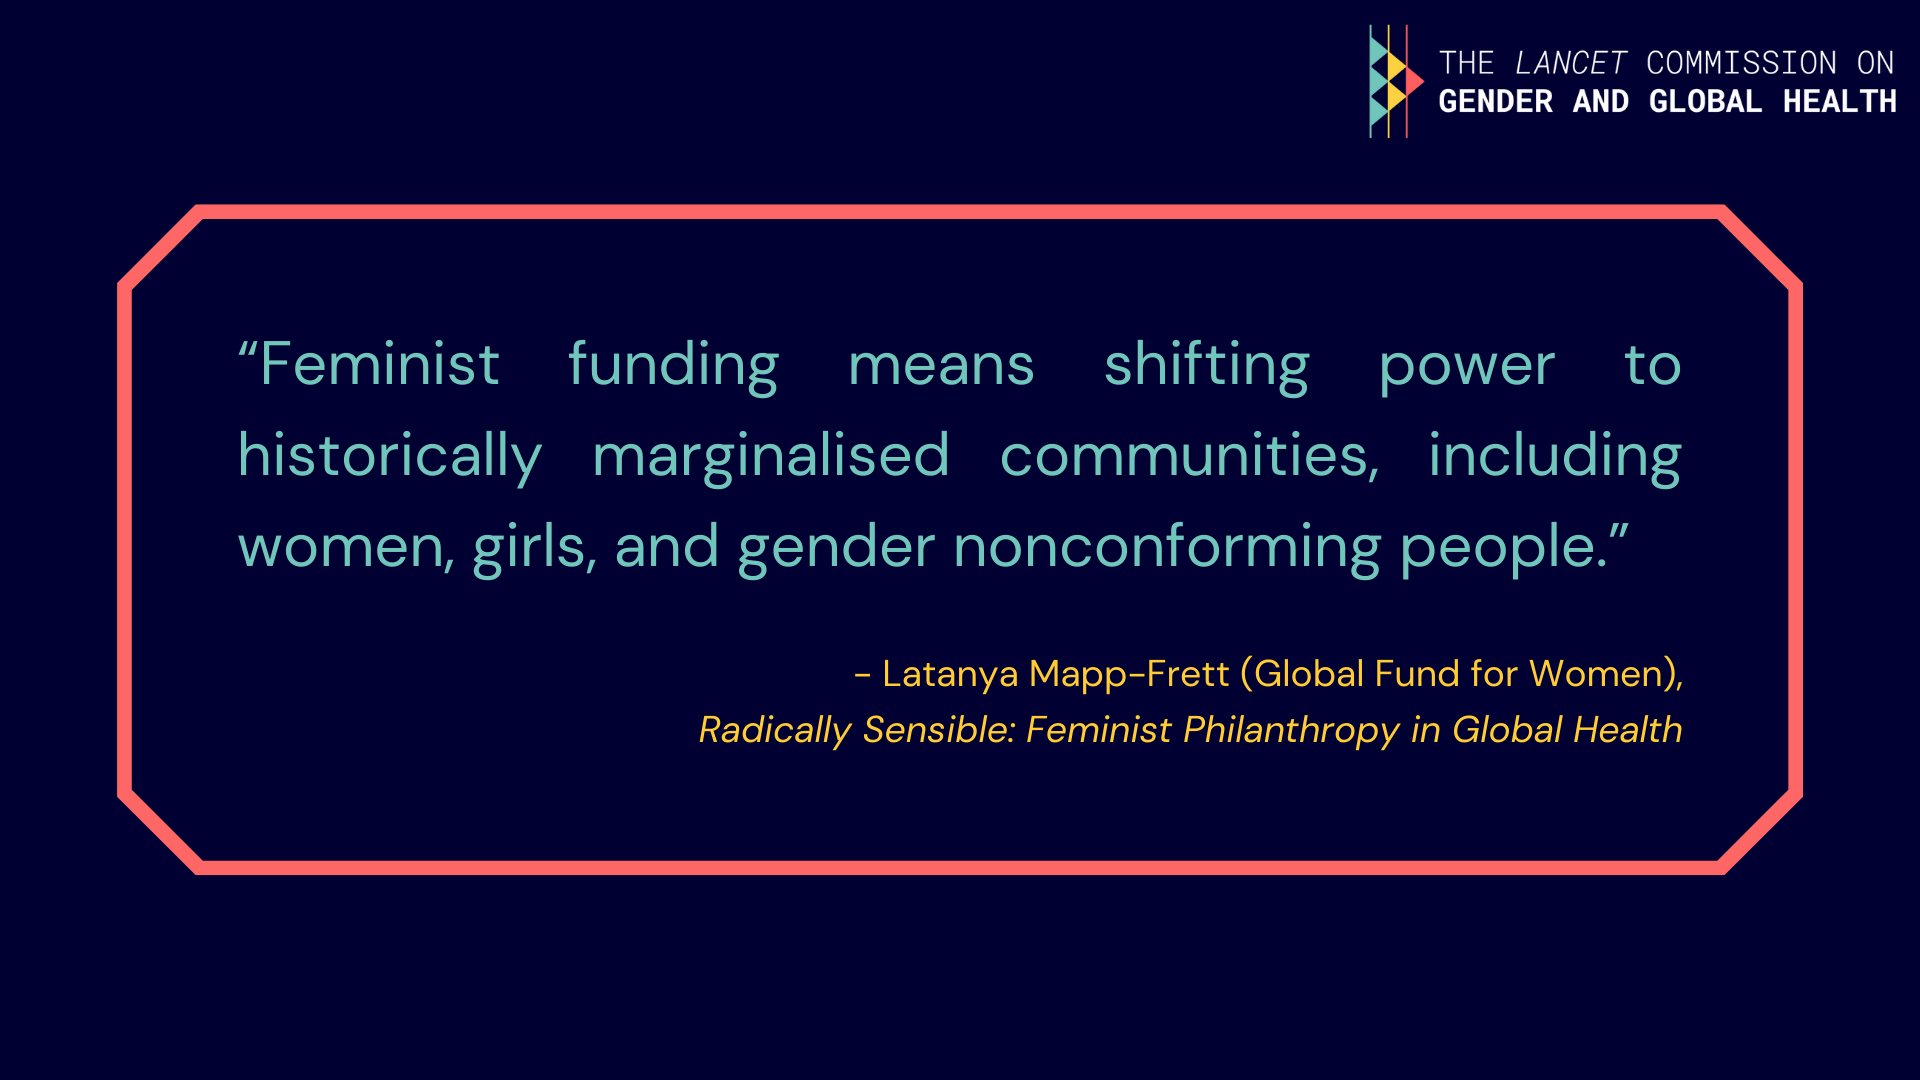 Quote from Latanya Mapp-Frett: "Feminist funding means shifting power to historically marginalised communities, including women, girls, and gender nonconforming people".